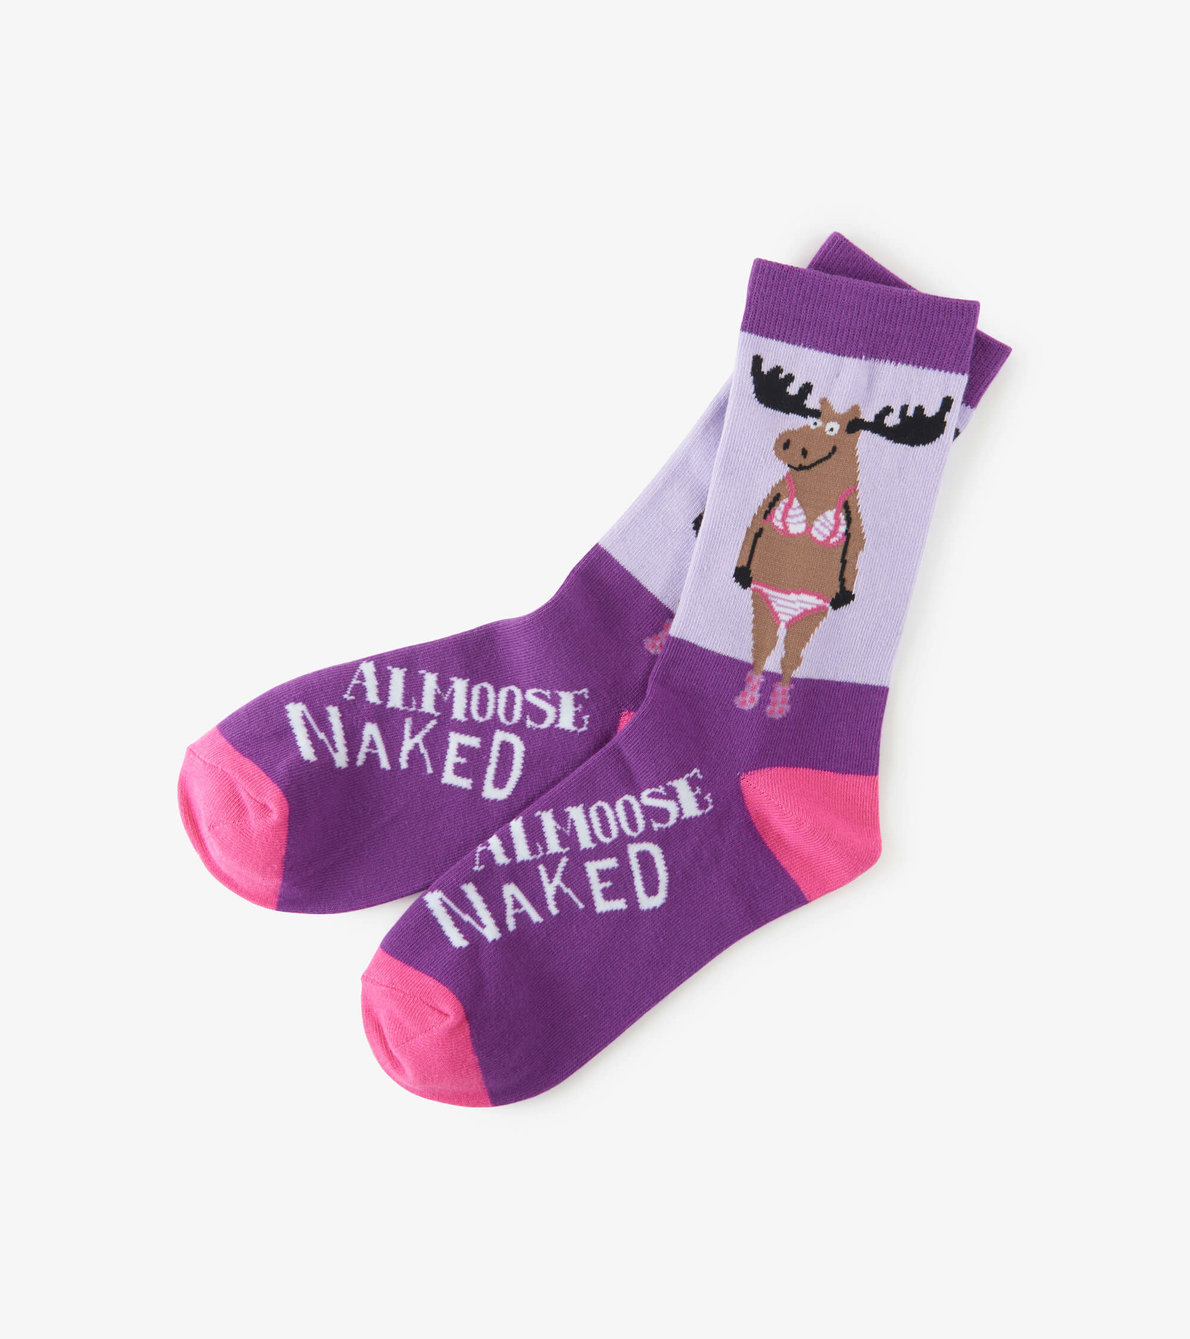 View larger image of Almoose Naked Women's Crew Socks